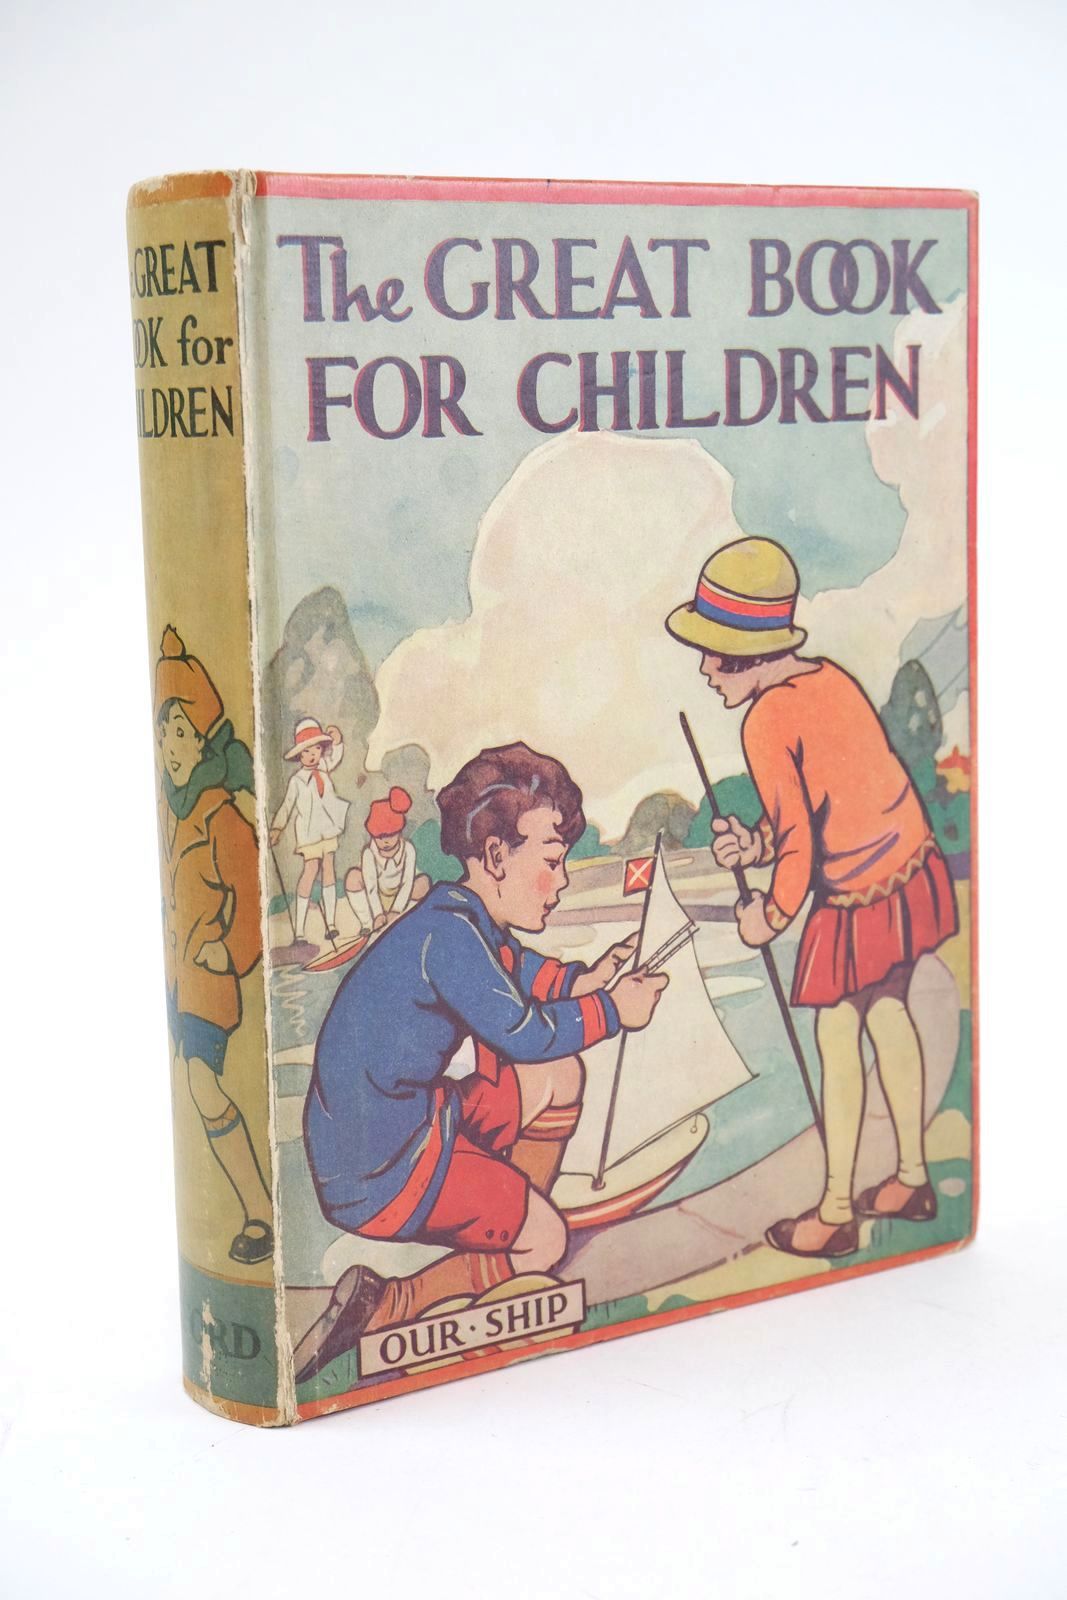 Photo of THE GREAT BOOK FOR CHILDREN written by Strang, Mrs. Herbert
Baker, Margaret
Herbertson, Agnes Grozier
et al,  illustrated by Lodge, Grace
Millar, H.R.
Peart, M.A.
et al.,  published by Oxford University Press, Humphrey Milford (STOCK CODE: 1324756)  for sale by Stella & Rose's Books